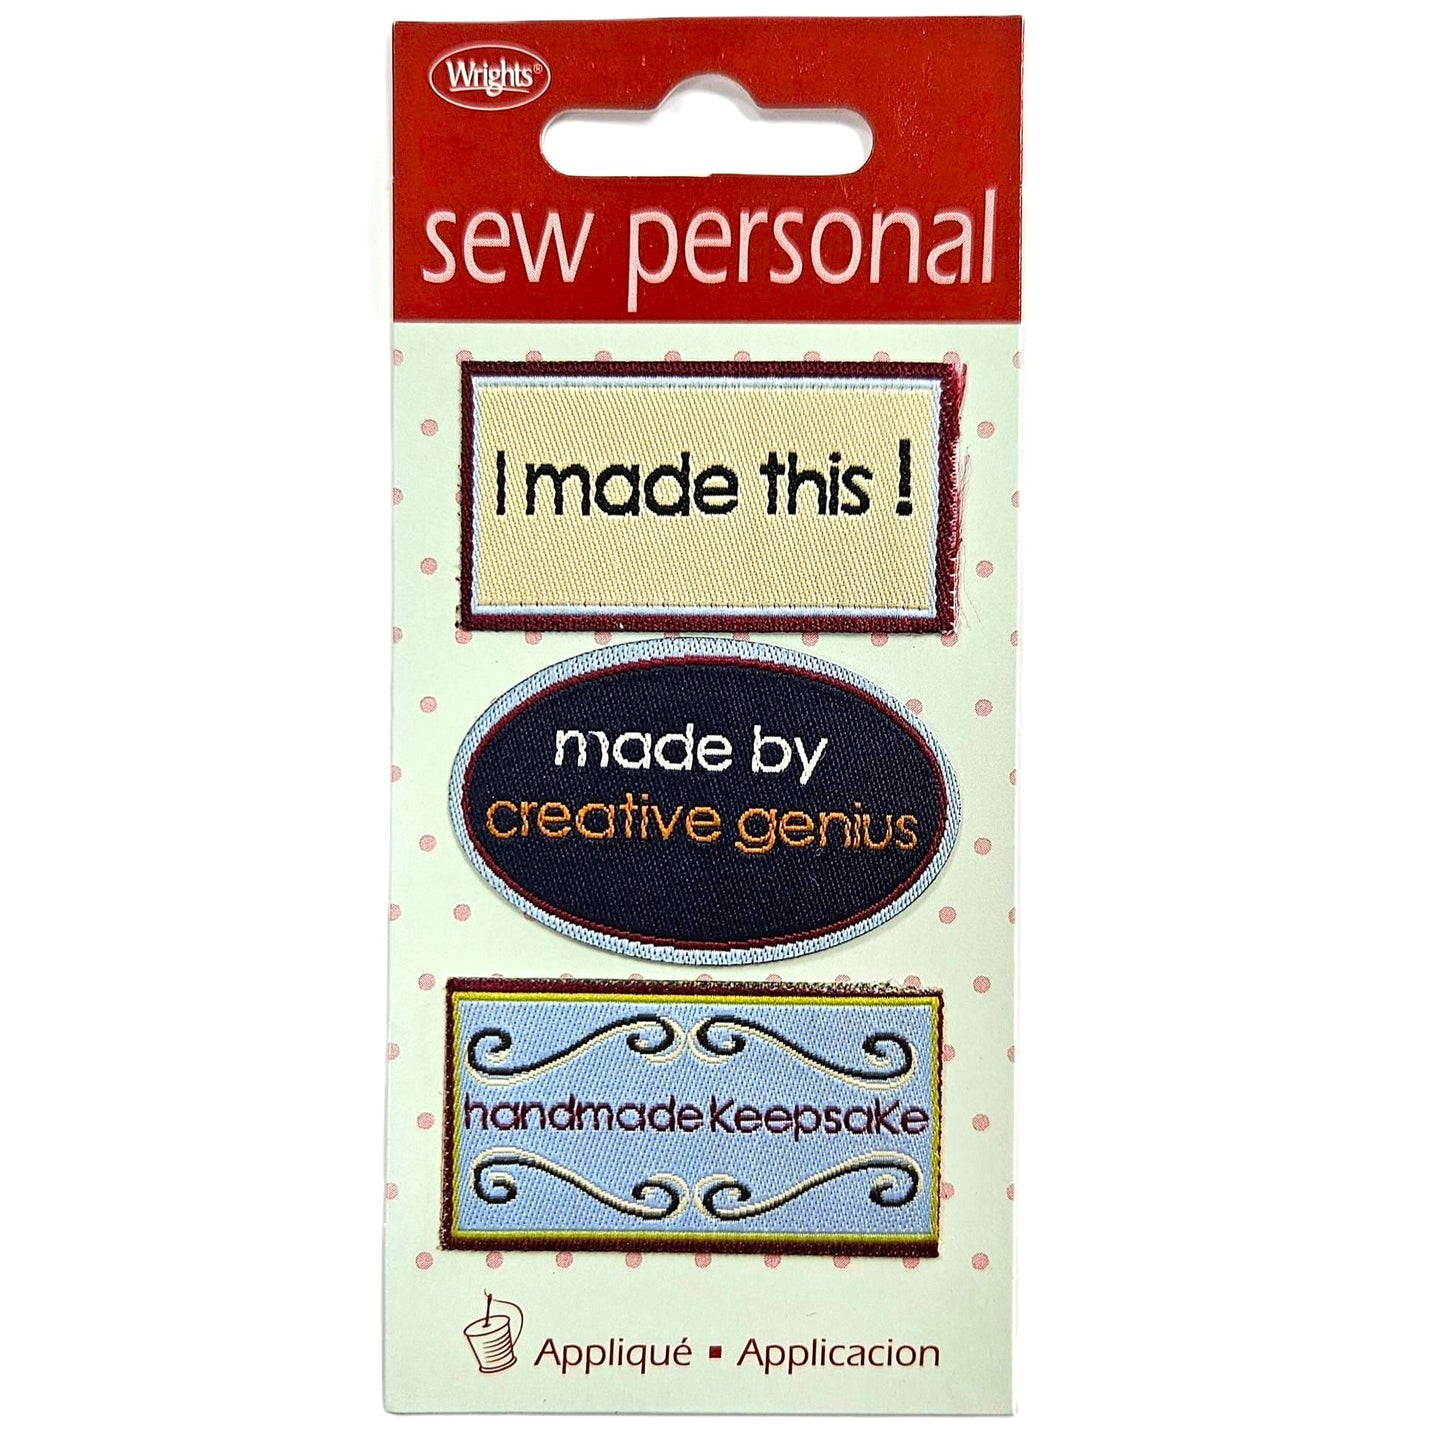 Wrights Sew Personal Iron-on Applique - I Made This